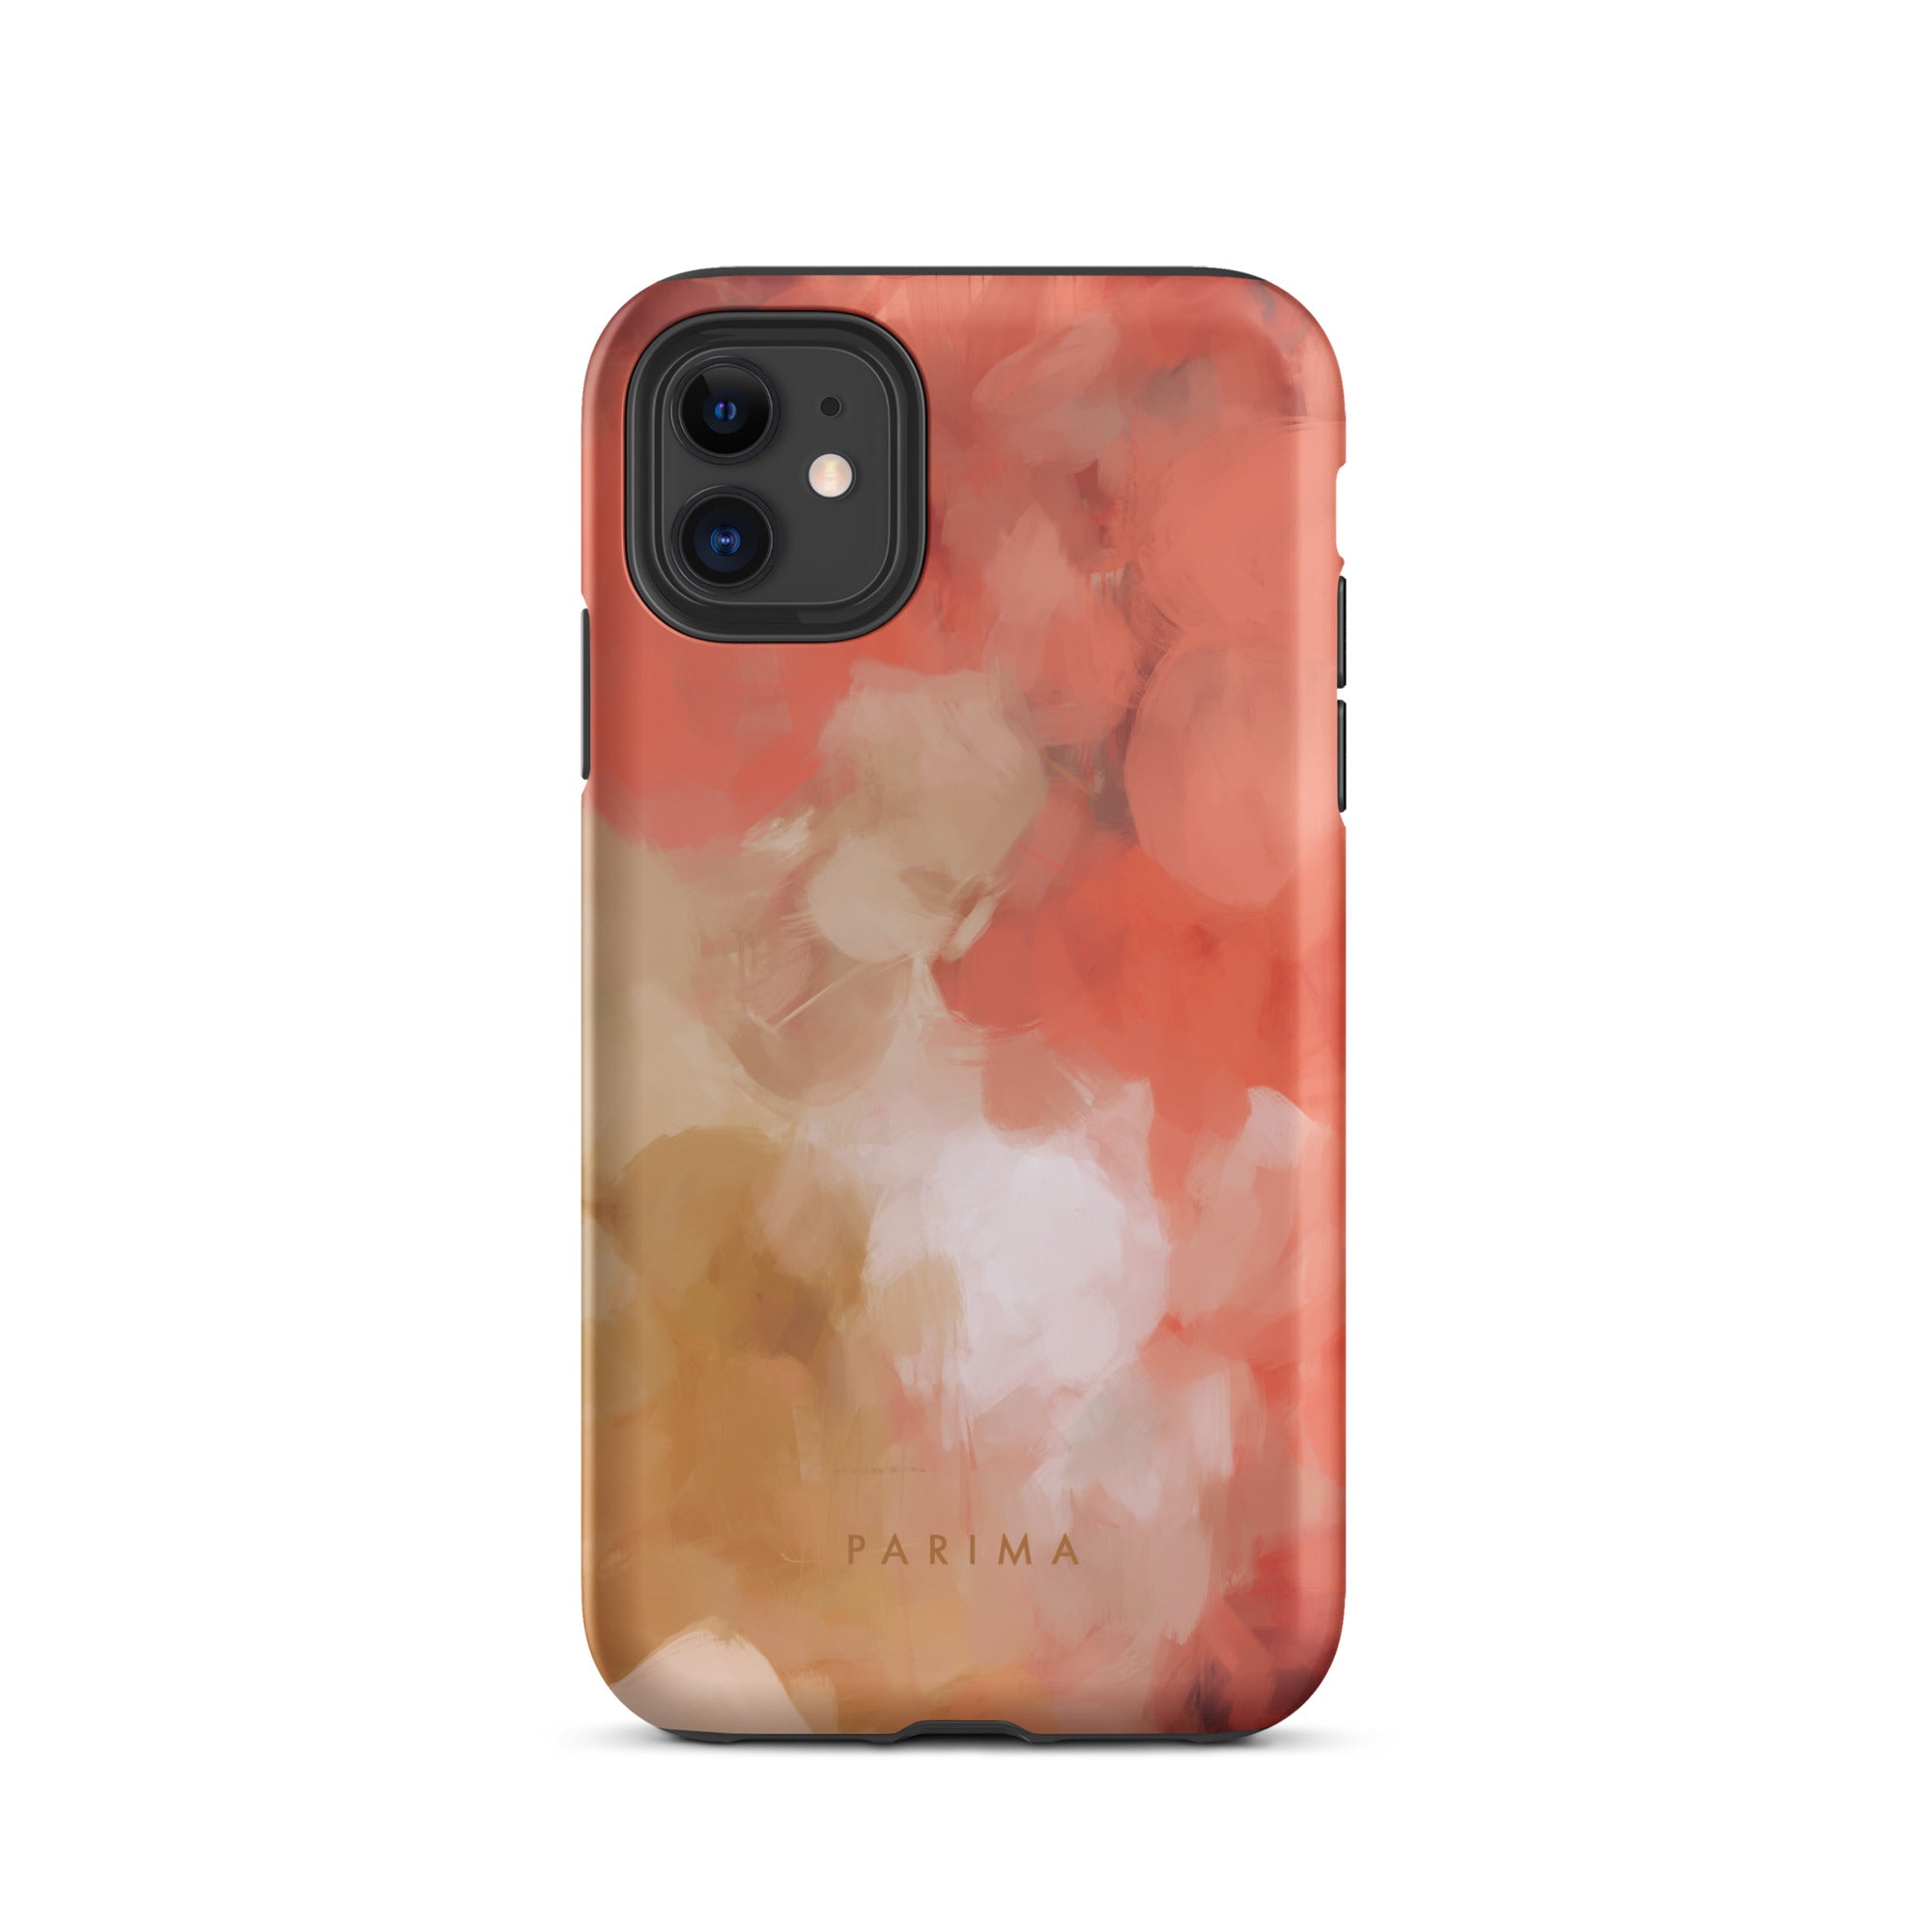 Begonia, pink and gold abstract art - iPhone 11 tough case by Parima Studio